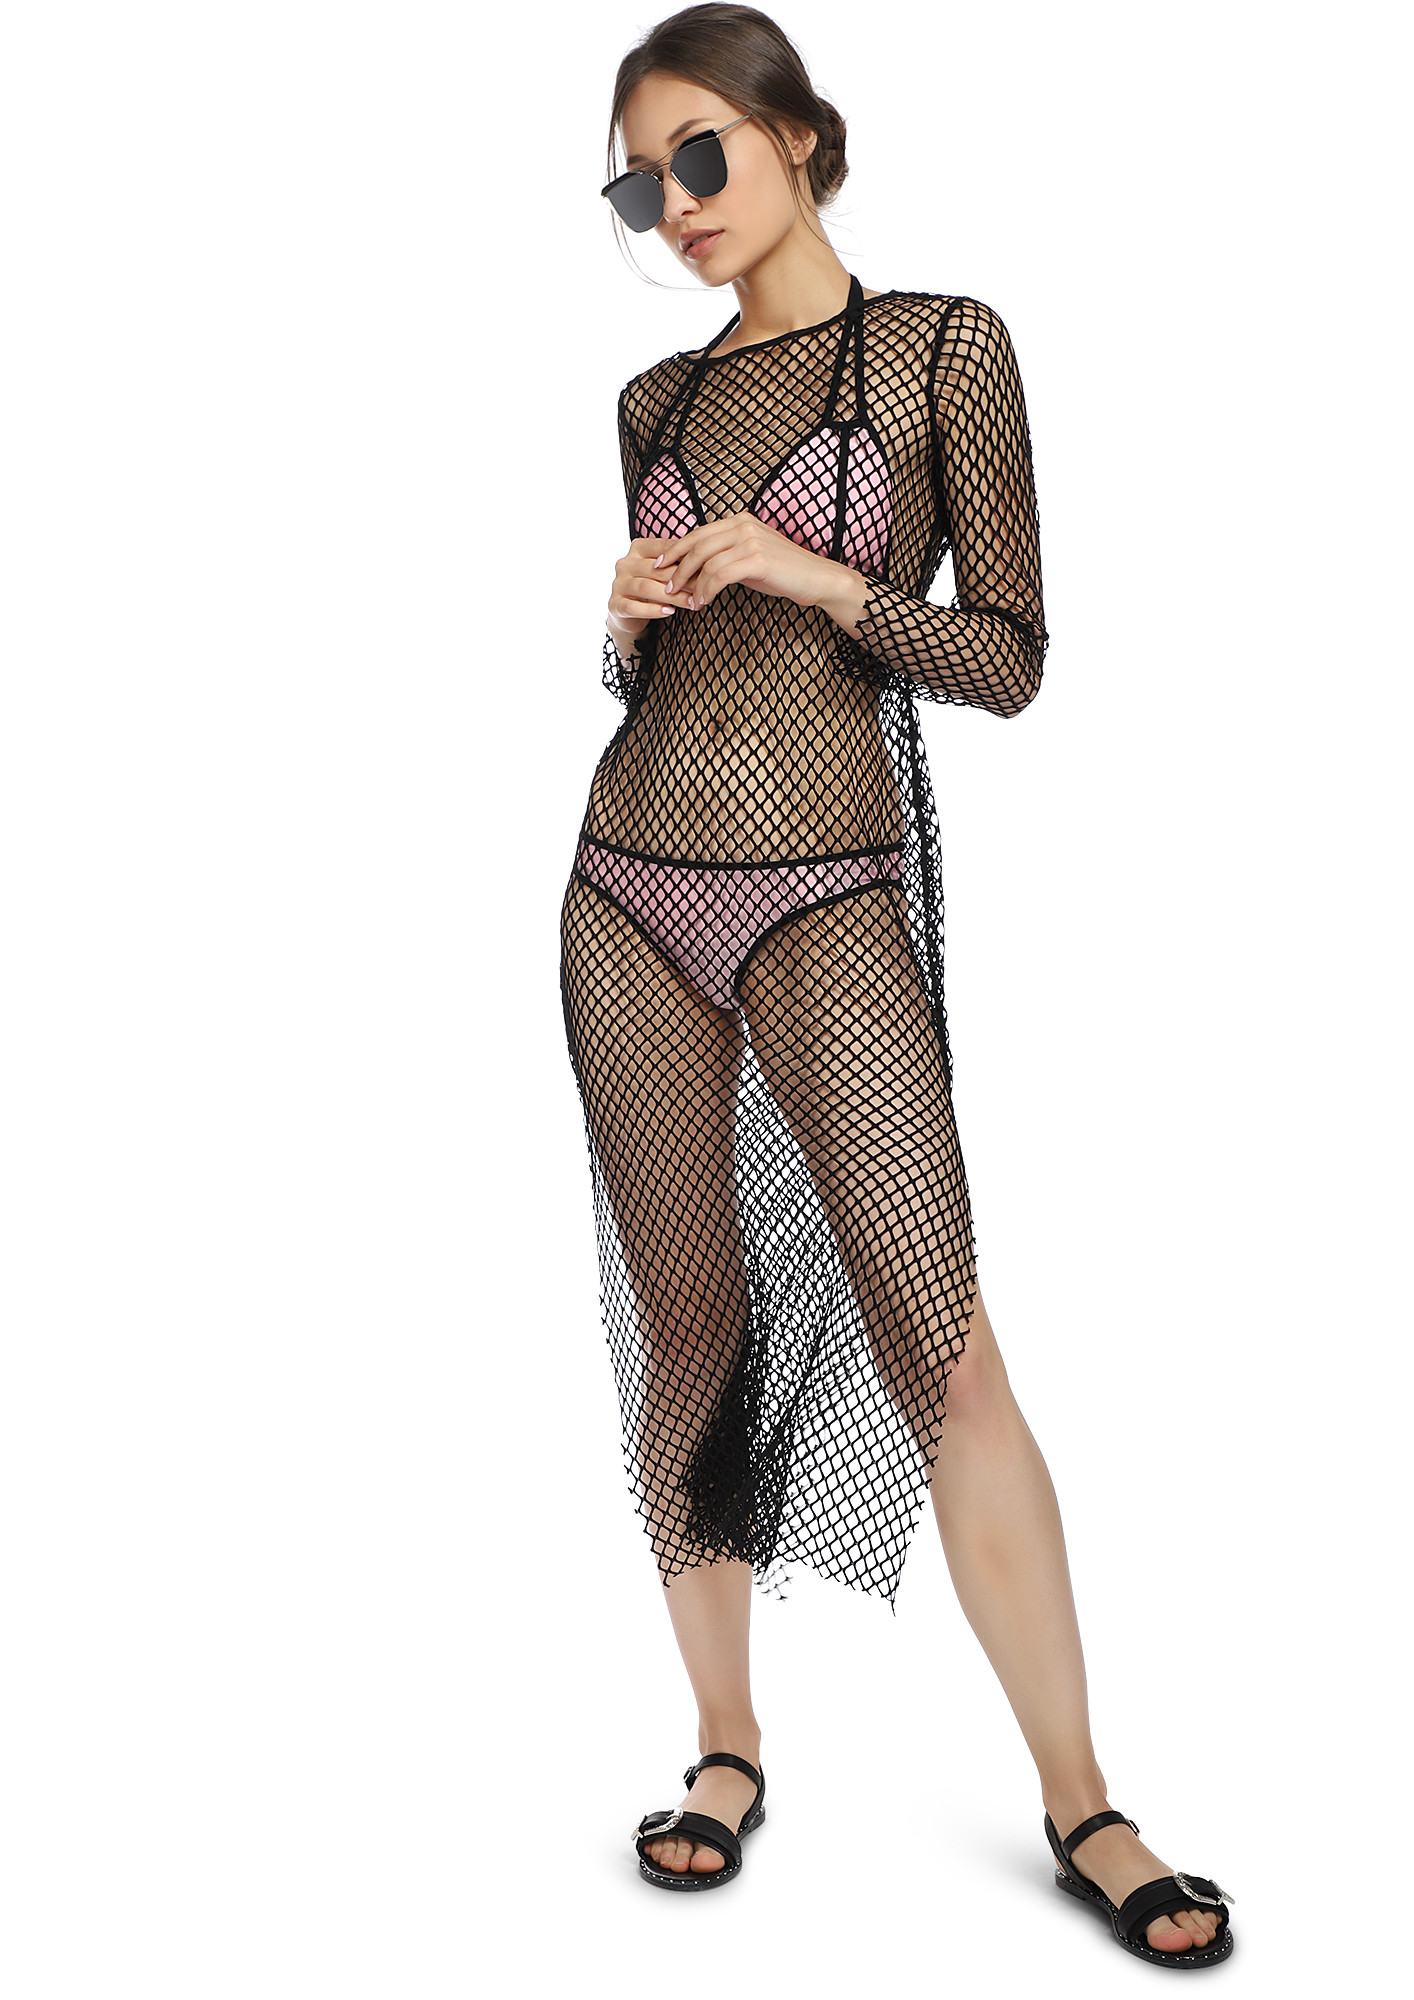 THE HOT MESH BLACK COVER UP